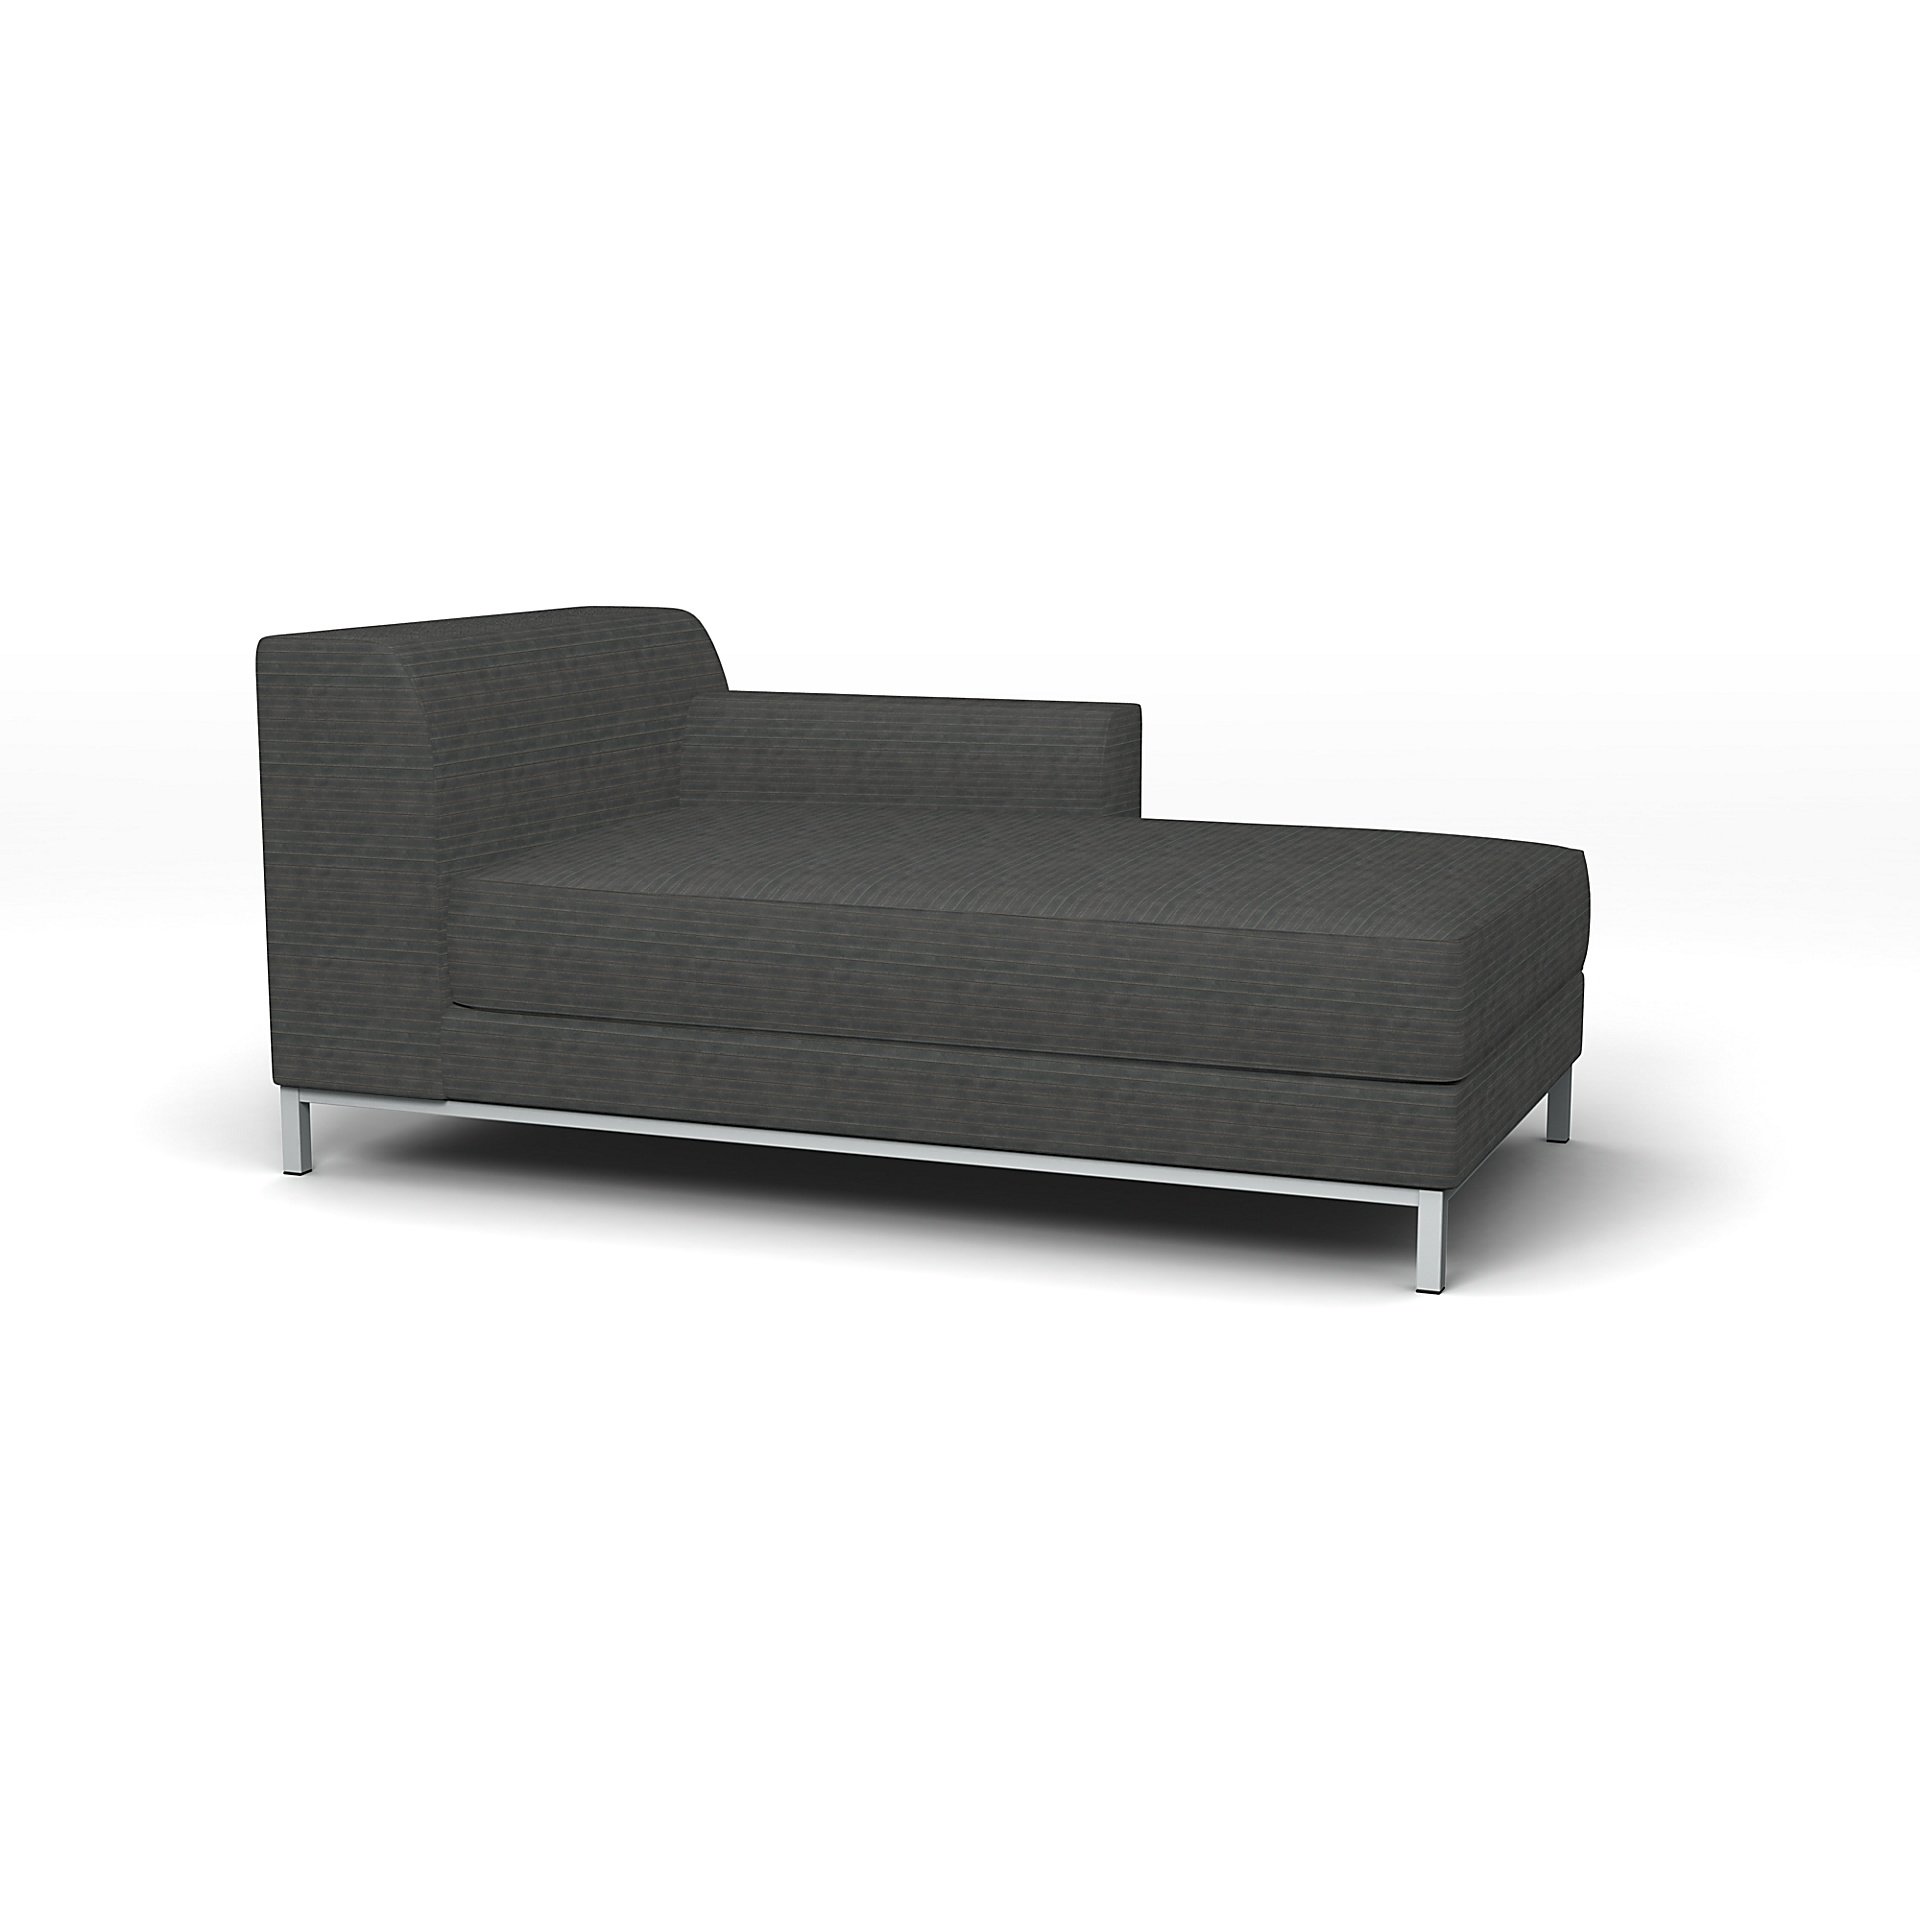 IKEA - Kramfors Chaise Longue with Right Arm Cover, Licorice, Corduroy - Bemz